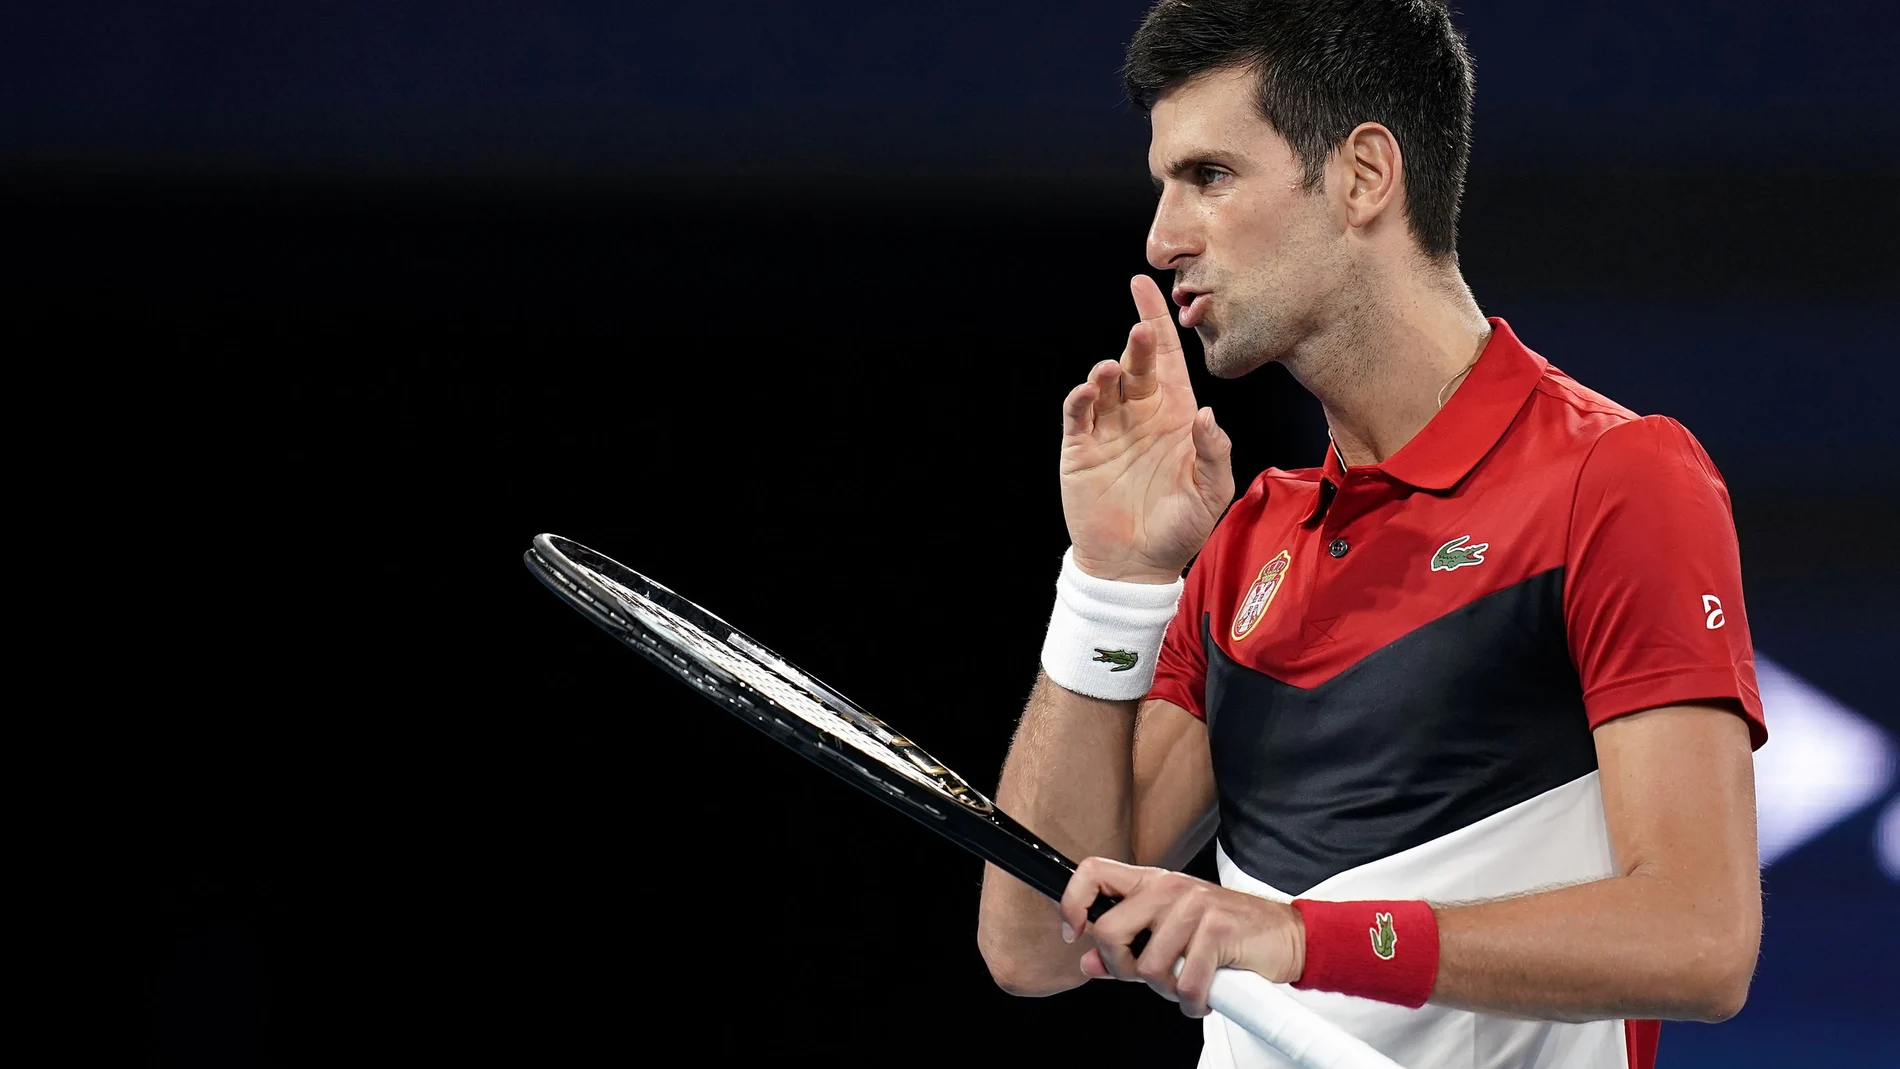 Novak Djokovic of Serbia gestures during his singles match against Kevin Anderson of South Africa on day 2 of the ATP Cup tennis tournament at Pat Rafter Arena in Brisbane